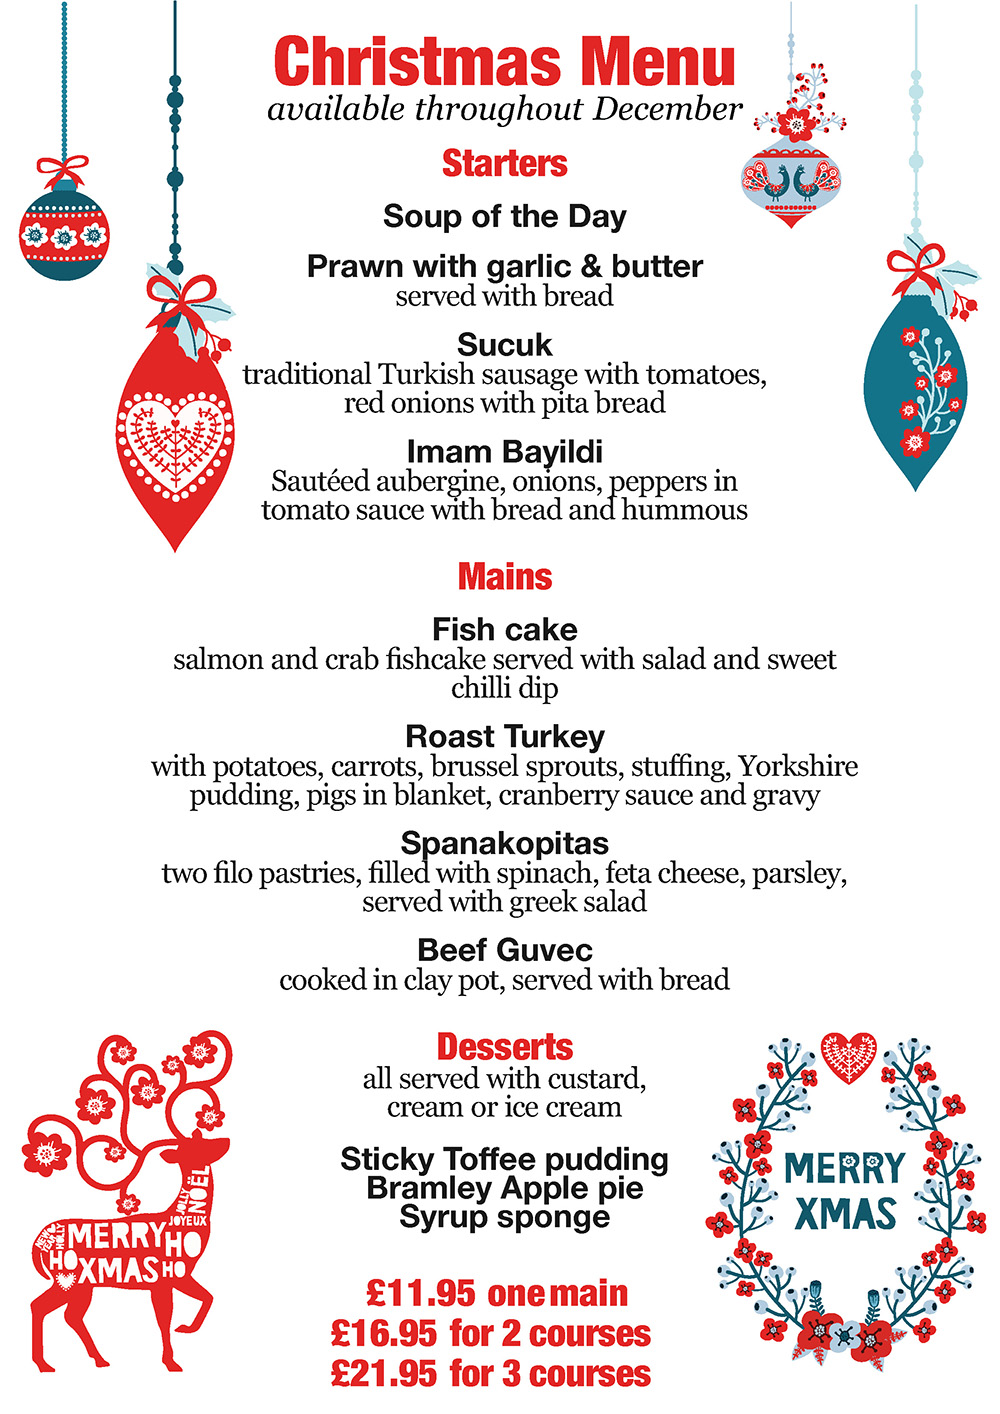 The Old Mill Coffee House - Christmas menu